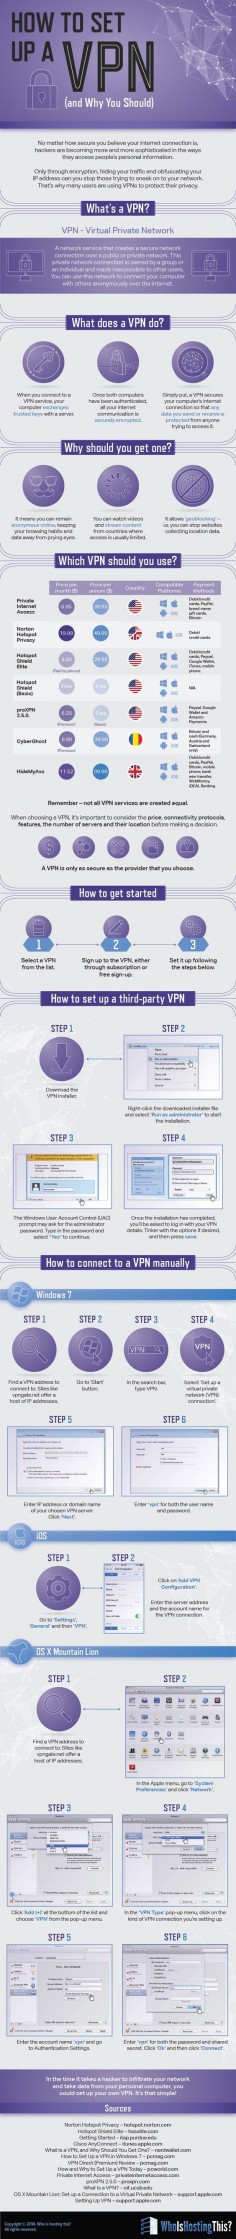 Infographic: How To Set Up a VPN (and Why You Should)No matter how secure you believe your internet connection is, hackers are becoming more and more sophisticated in the ways they access people's personal information. Only through encryption, hiding your traffic and obfuscating your IP address can you stop those trying to sneak on to your network. That's why many users are using VPNs to protect their privacy.